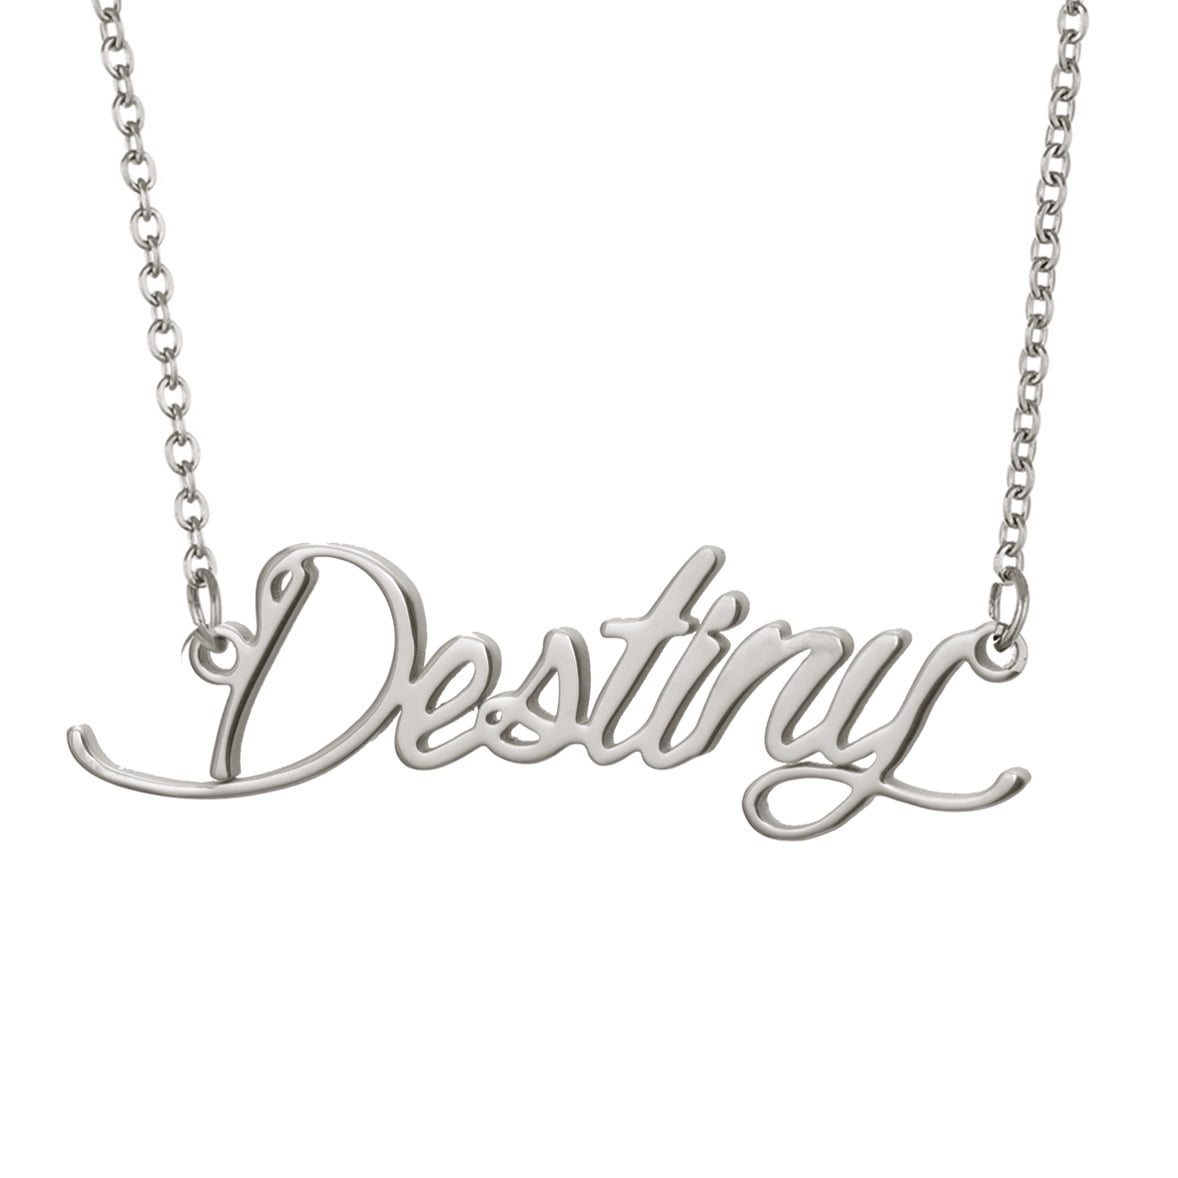 Unique Gifts Store Happy Birthday Dorothy Infinity Heart Necklace 14k White Gold Finish Personalized Name